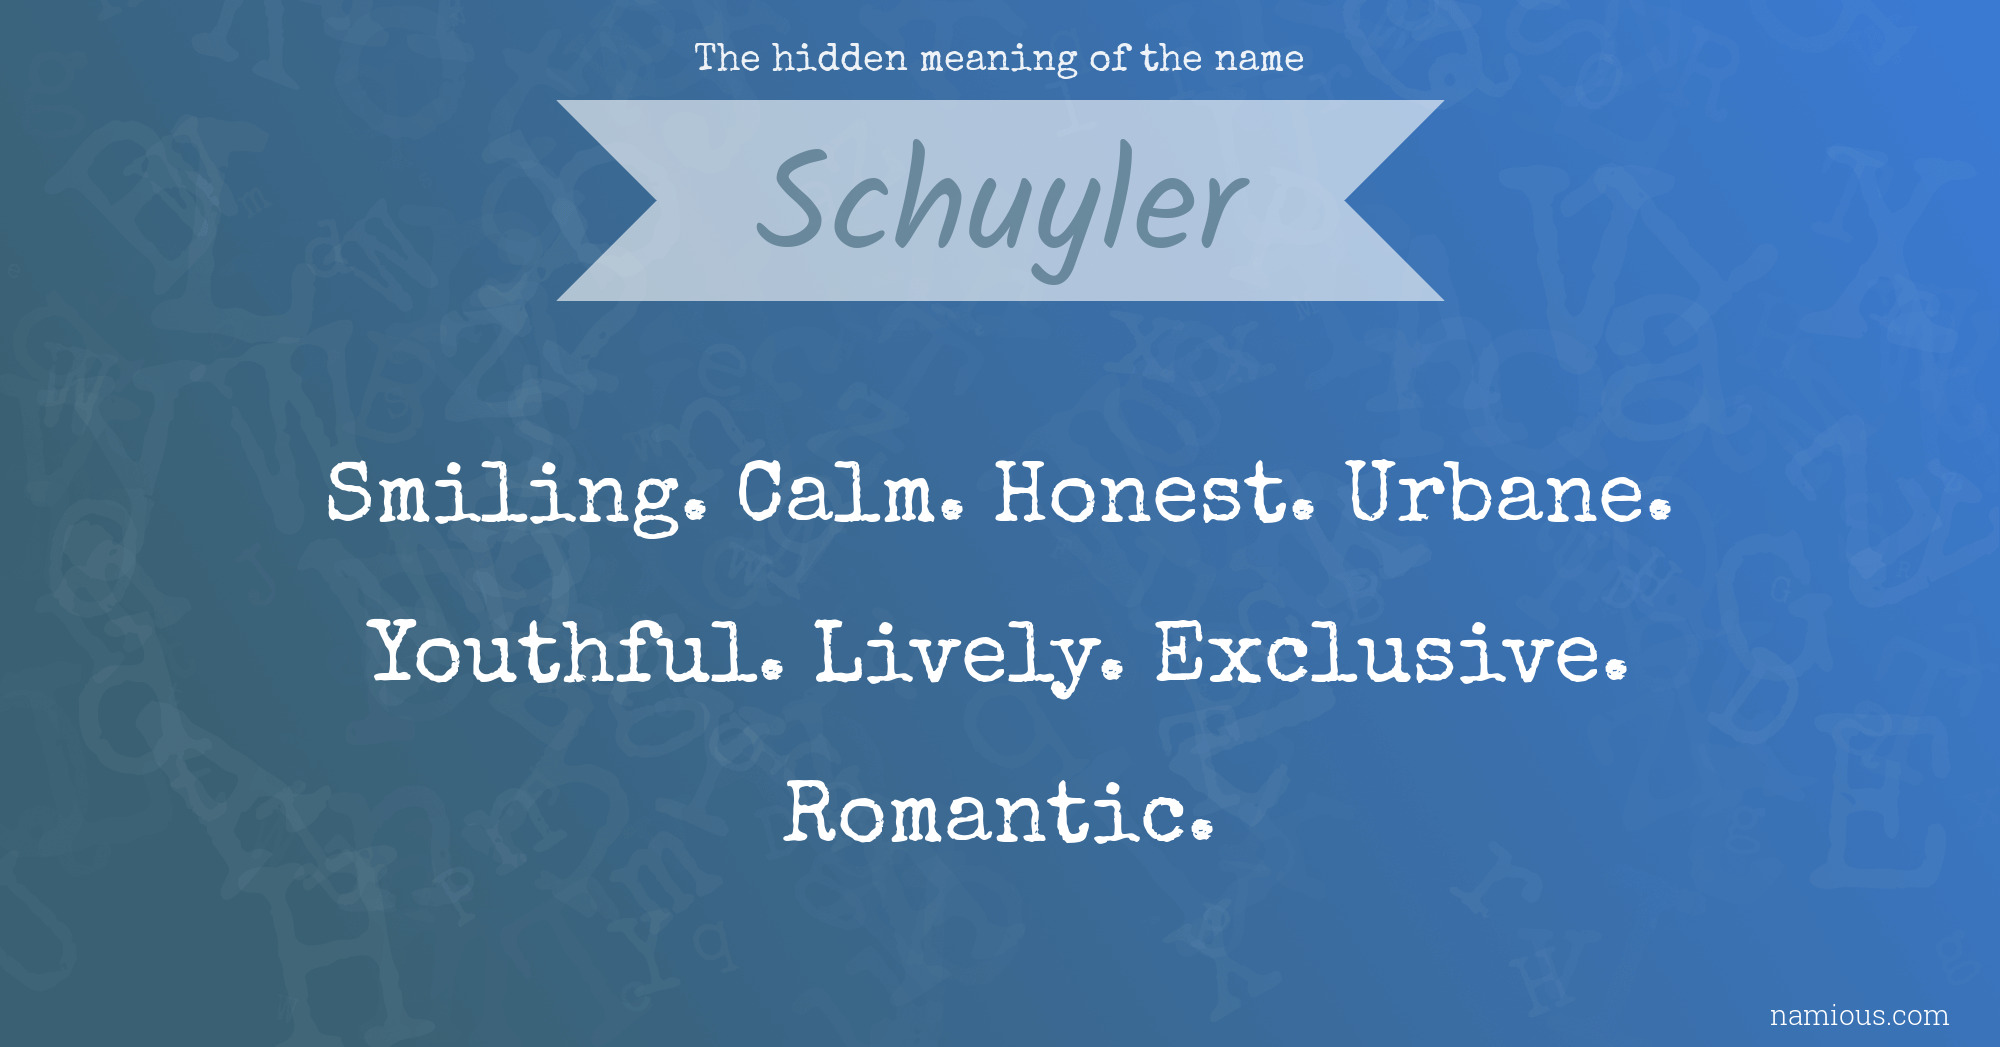 The hidden meaning of the name Schuyler